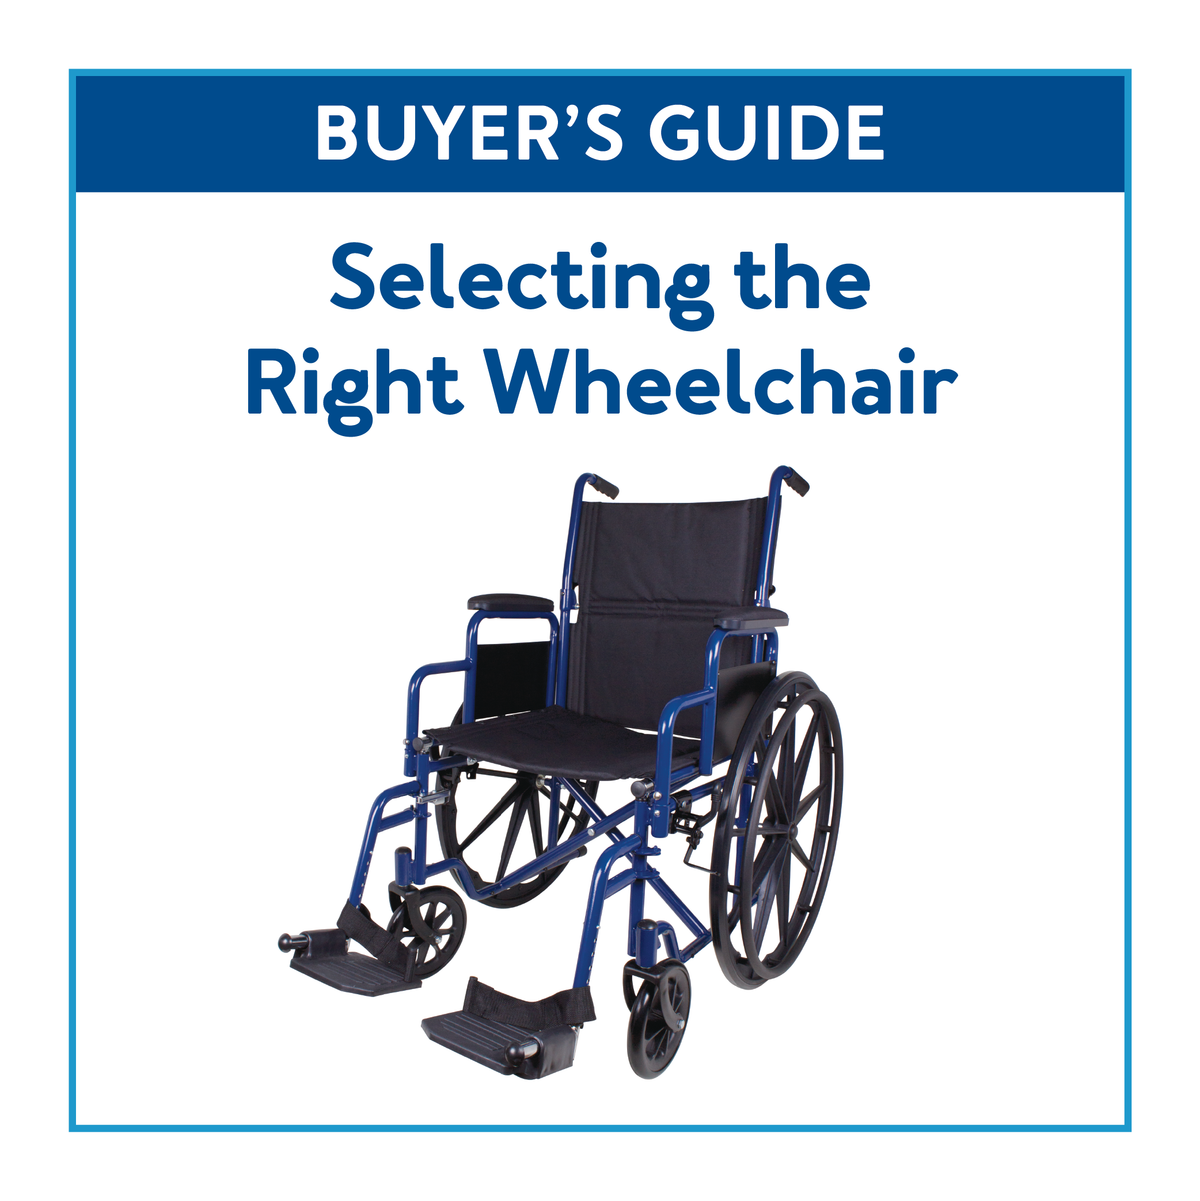 A wheelchair surrounded by a blue border with text Buyer’s Guide: Selecting the Right Wheelchair